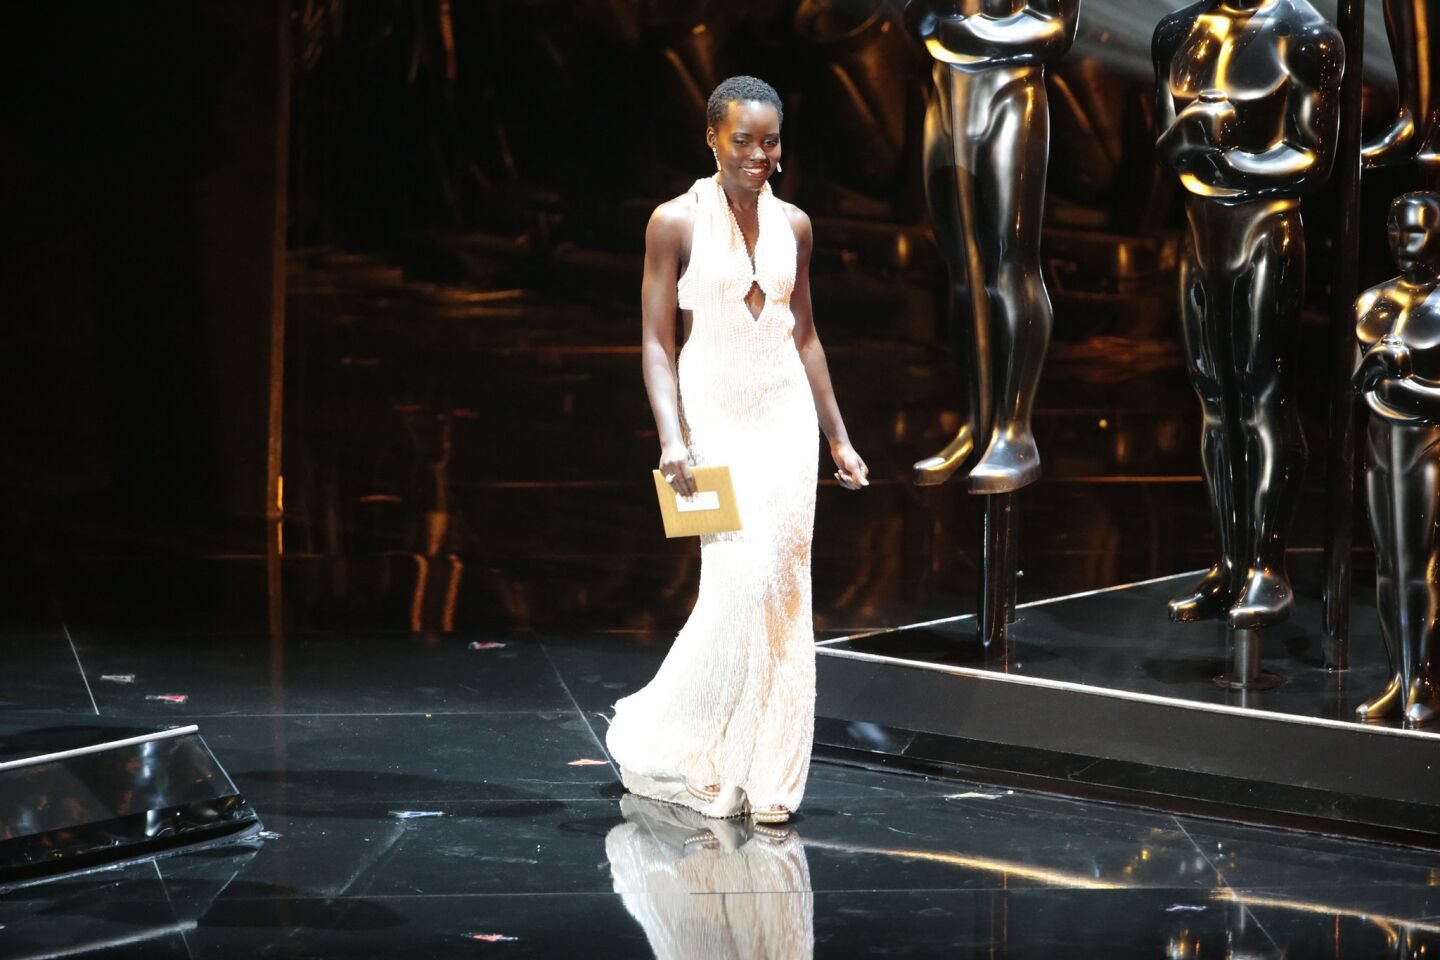 Lupita Nyong'o forgets which awards show she's at